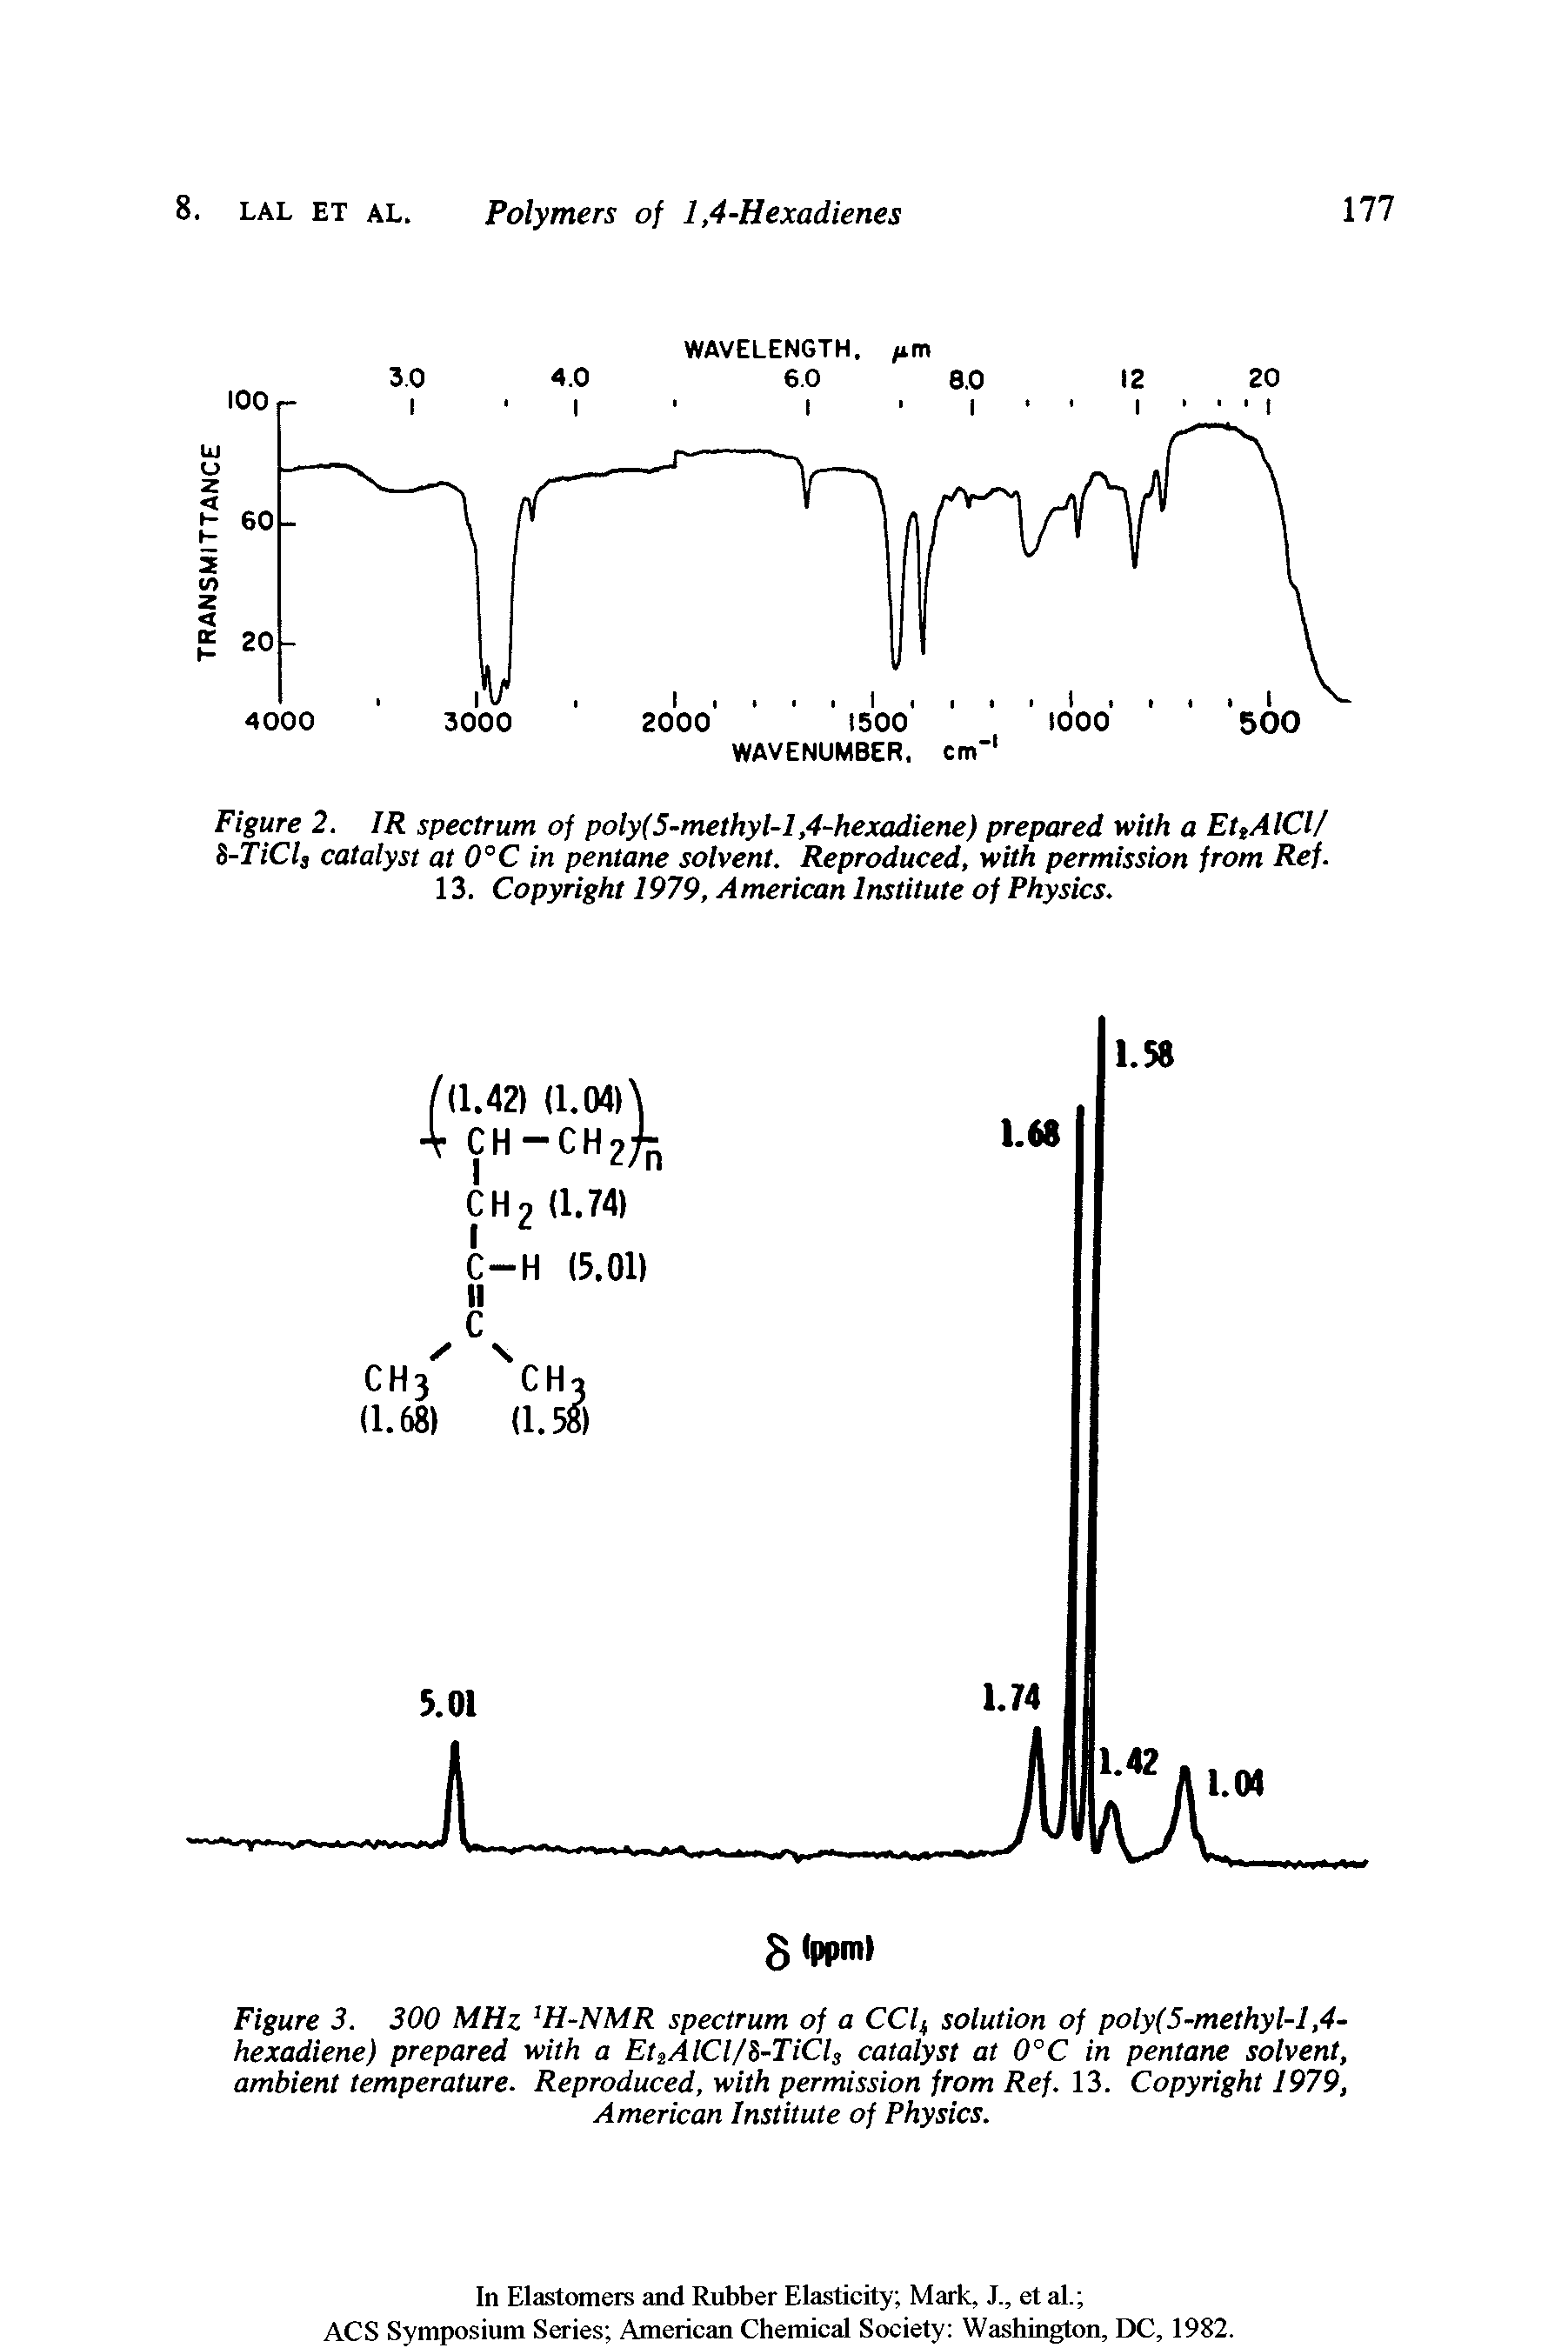 Figure 2. IR spectrum of poly(5-methyl-l,4-hexadiene) prepared with a EttAlCl/ h-TiCl3 catalyst at 0°C in pentane solvent. Reproduced, with permission from Ref. 13. Copyright 1979, American Institute of Physics.